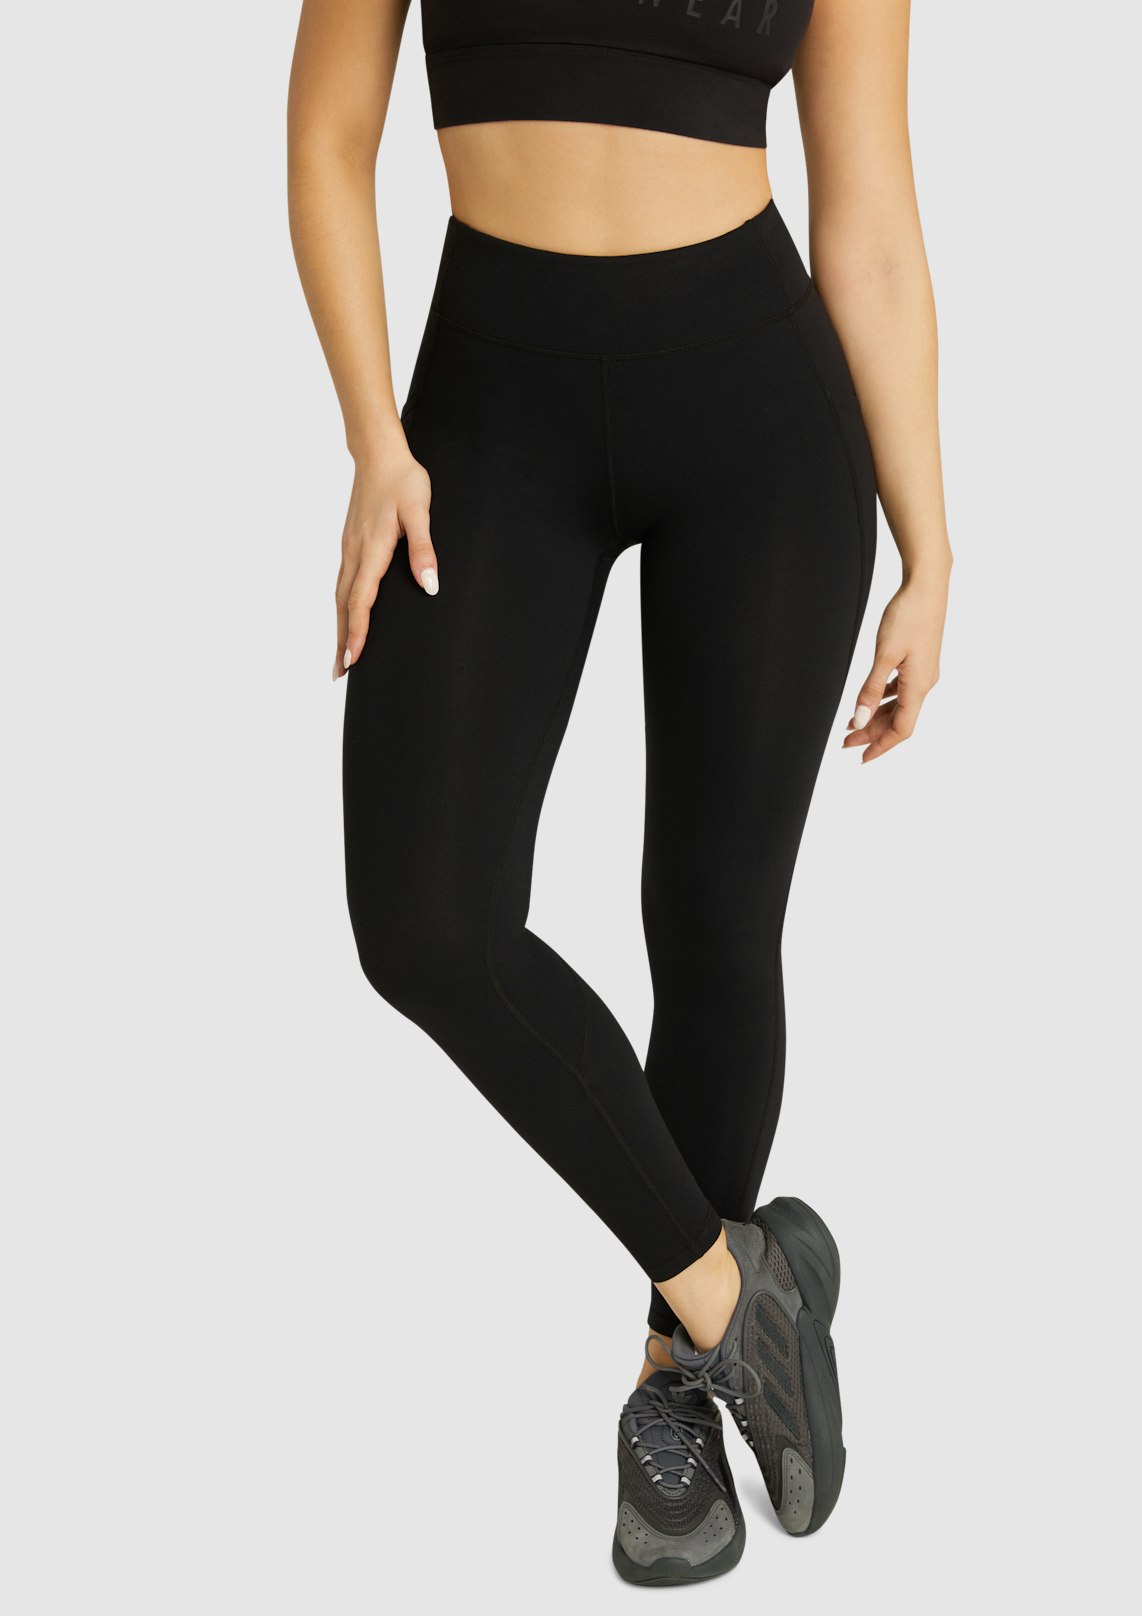 Luxesoft Pocket Full Length Tights by Rockwear Online